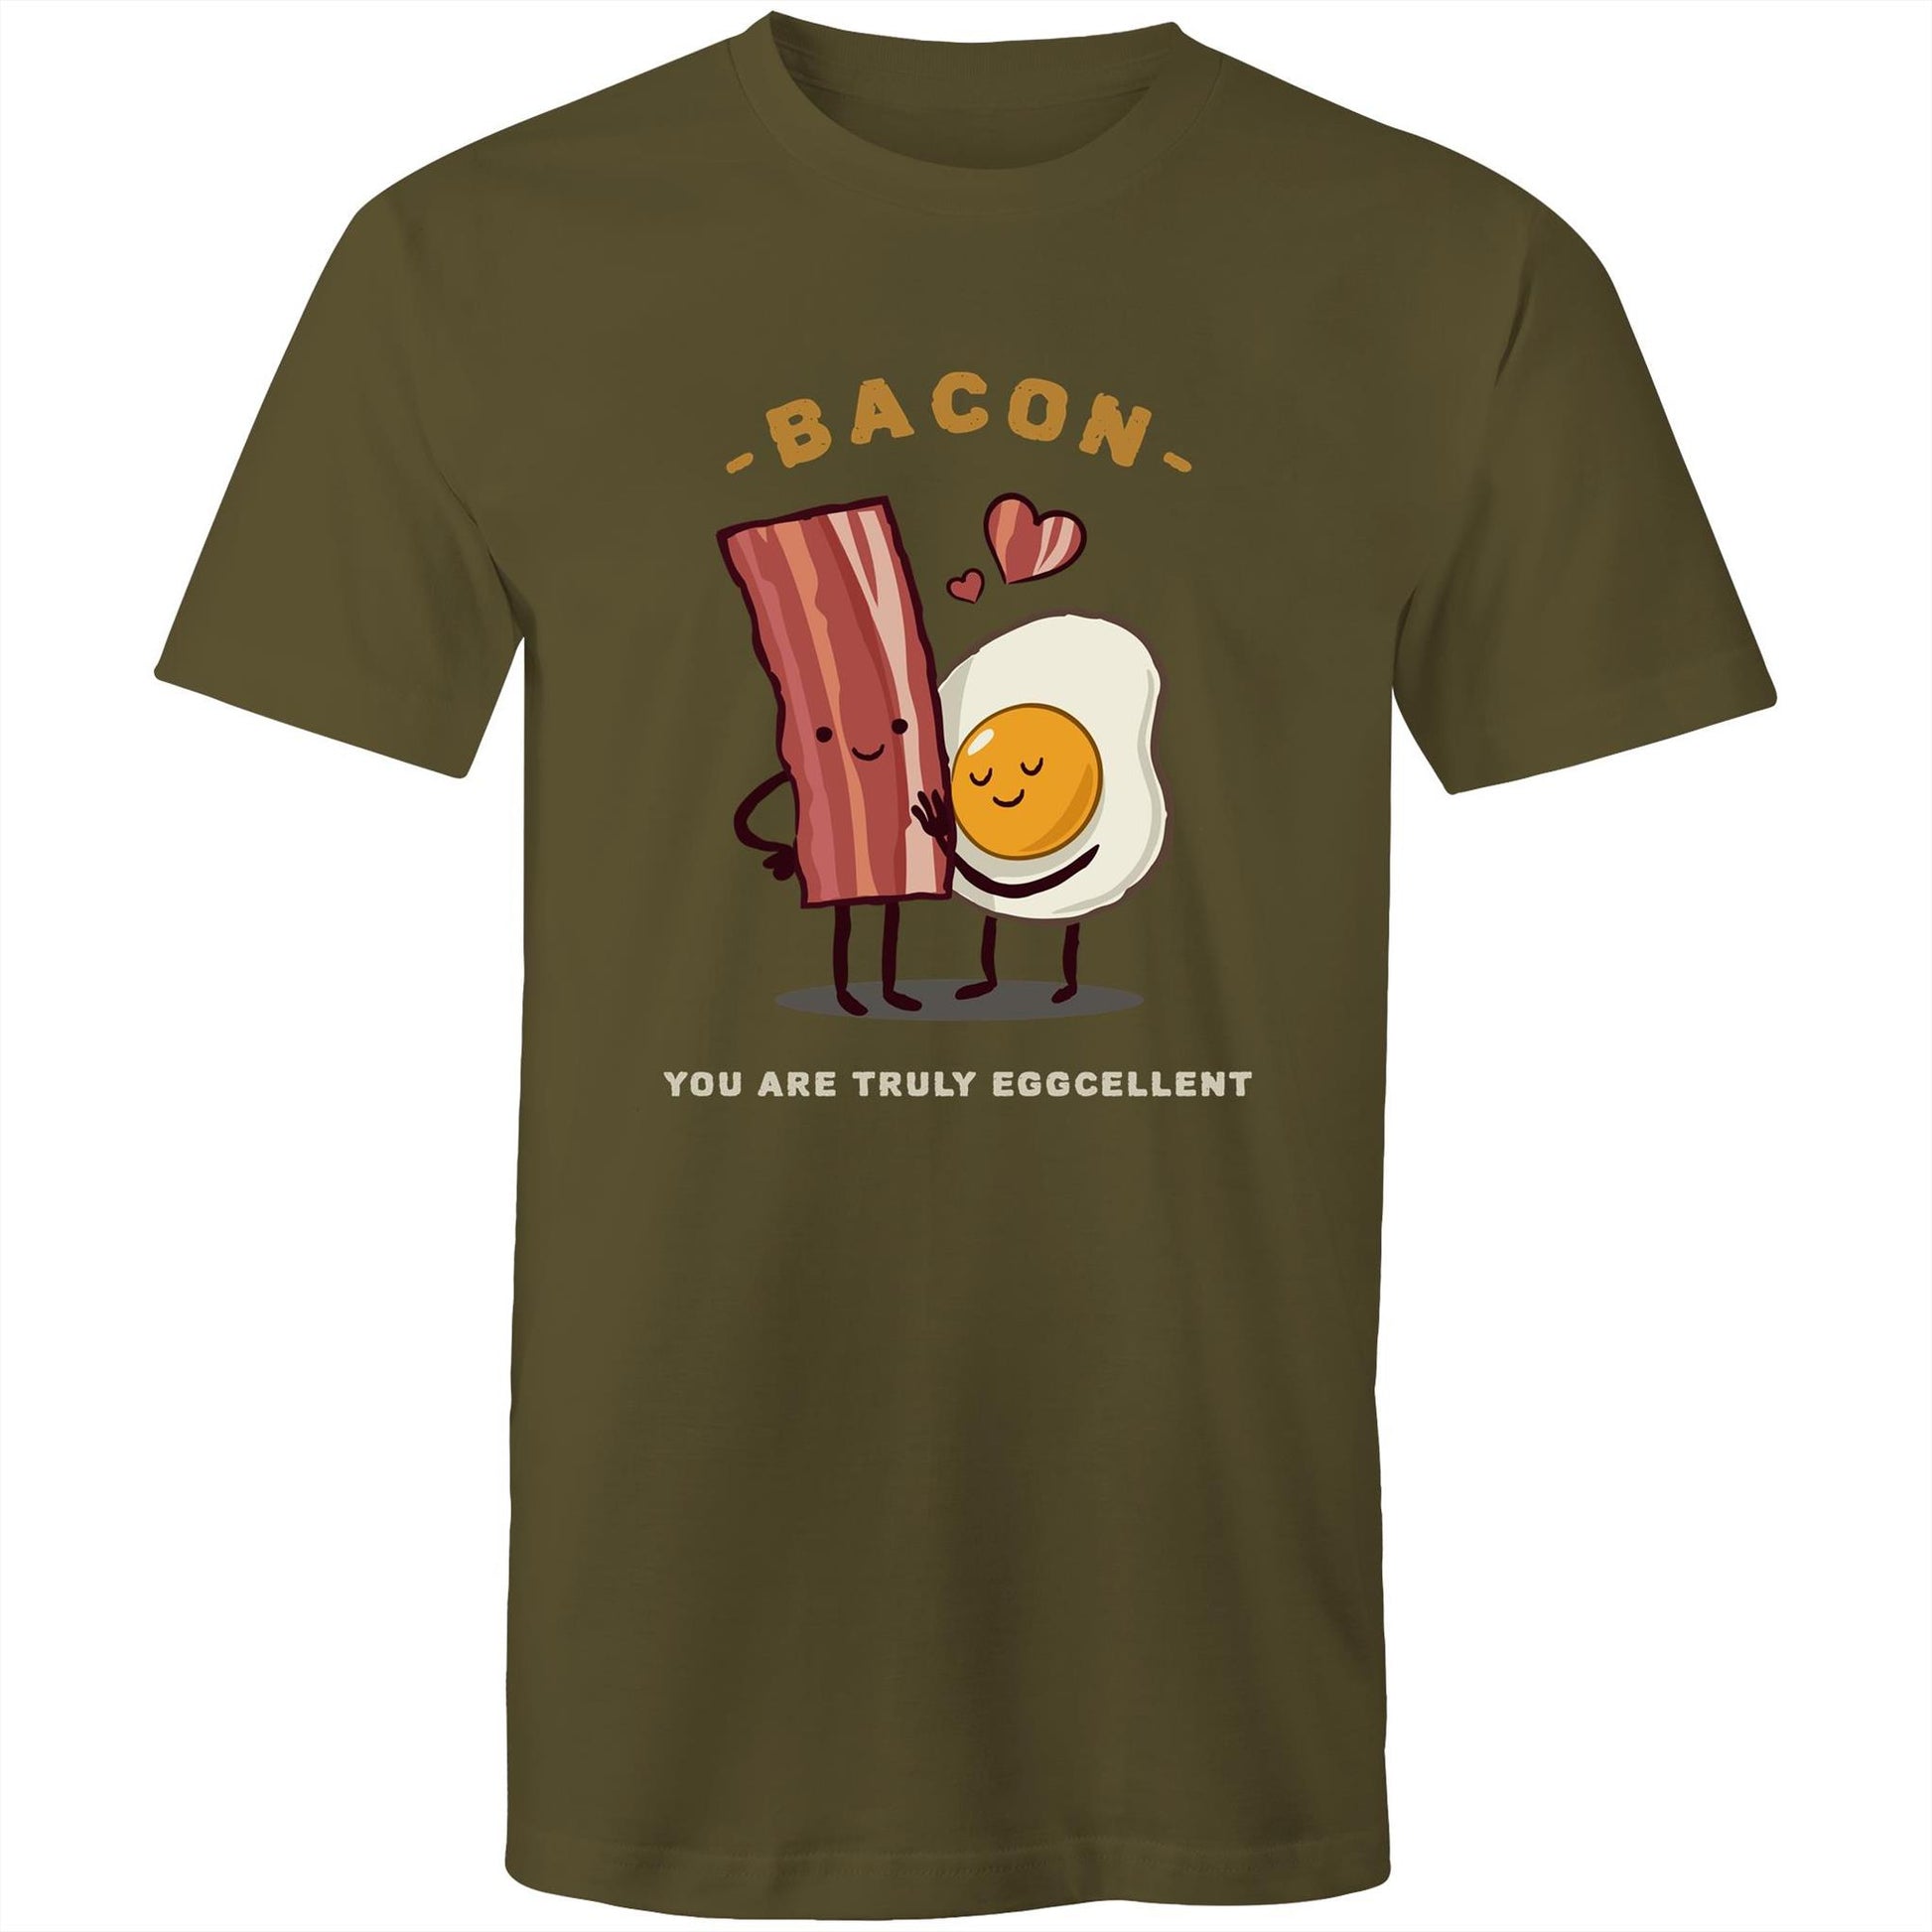 Bacon, You Are Truly Eggcellent - Mens T-Shirt Army Green Mens T-shirt Food